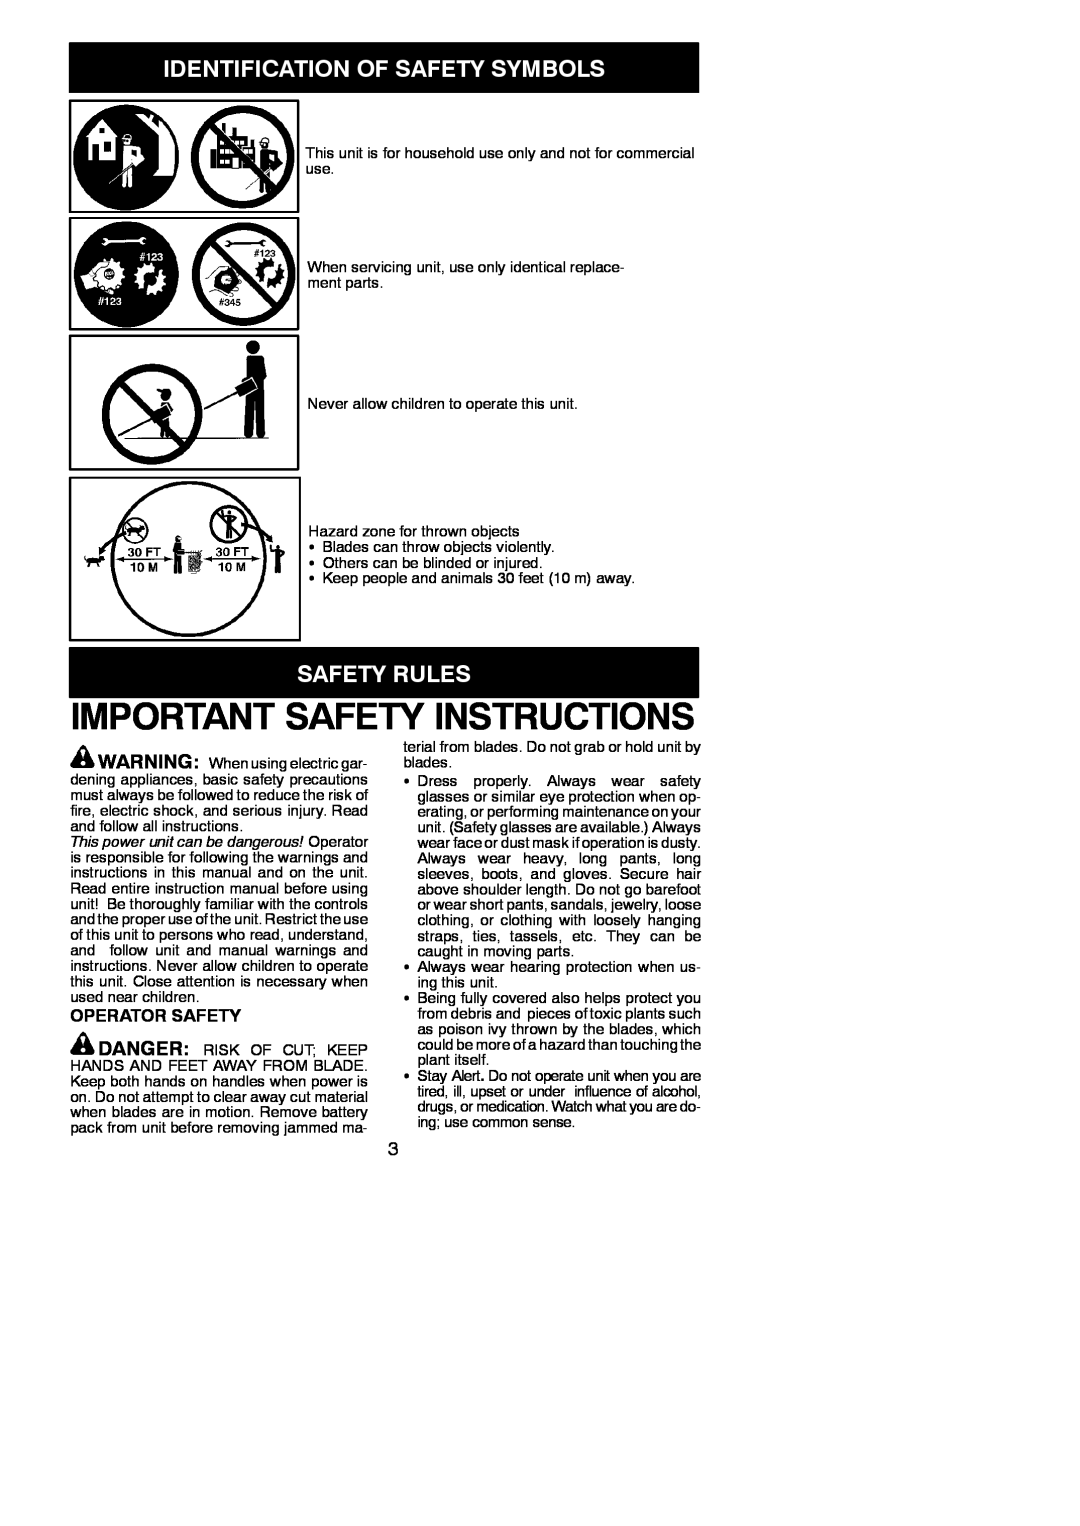 Weed Eater 952711899 Important Safety Instructions, Safety Rules, Identification Of Safety Symbols, Operator Safety 